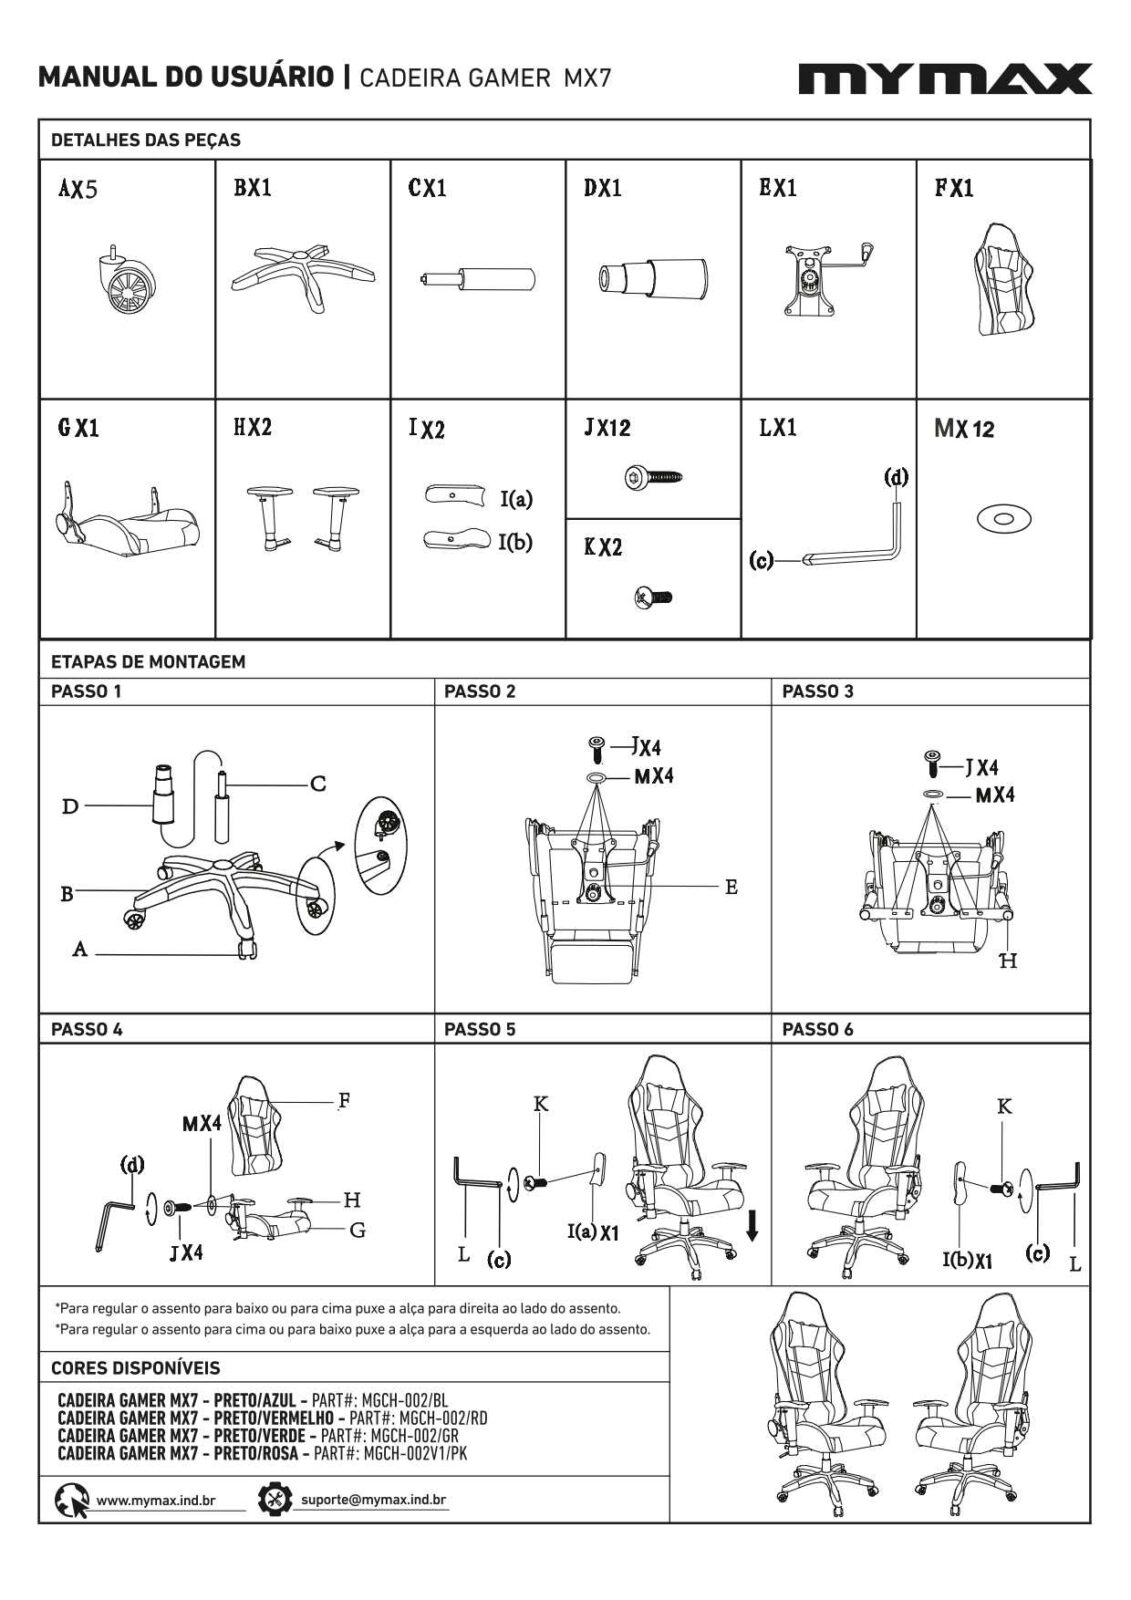 Manual-Cadeira-Gamer_outlines_page-0001 (1)